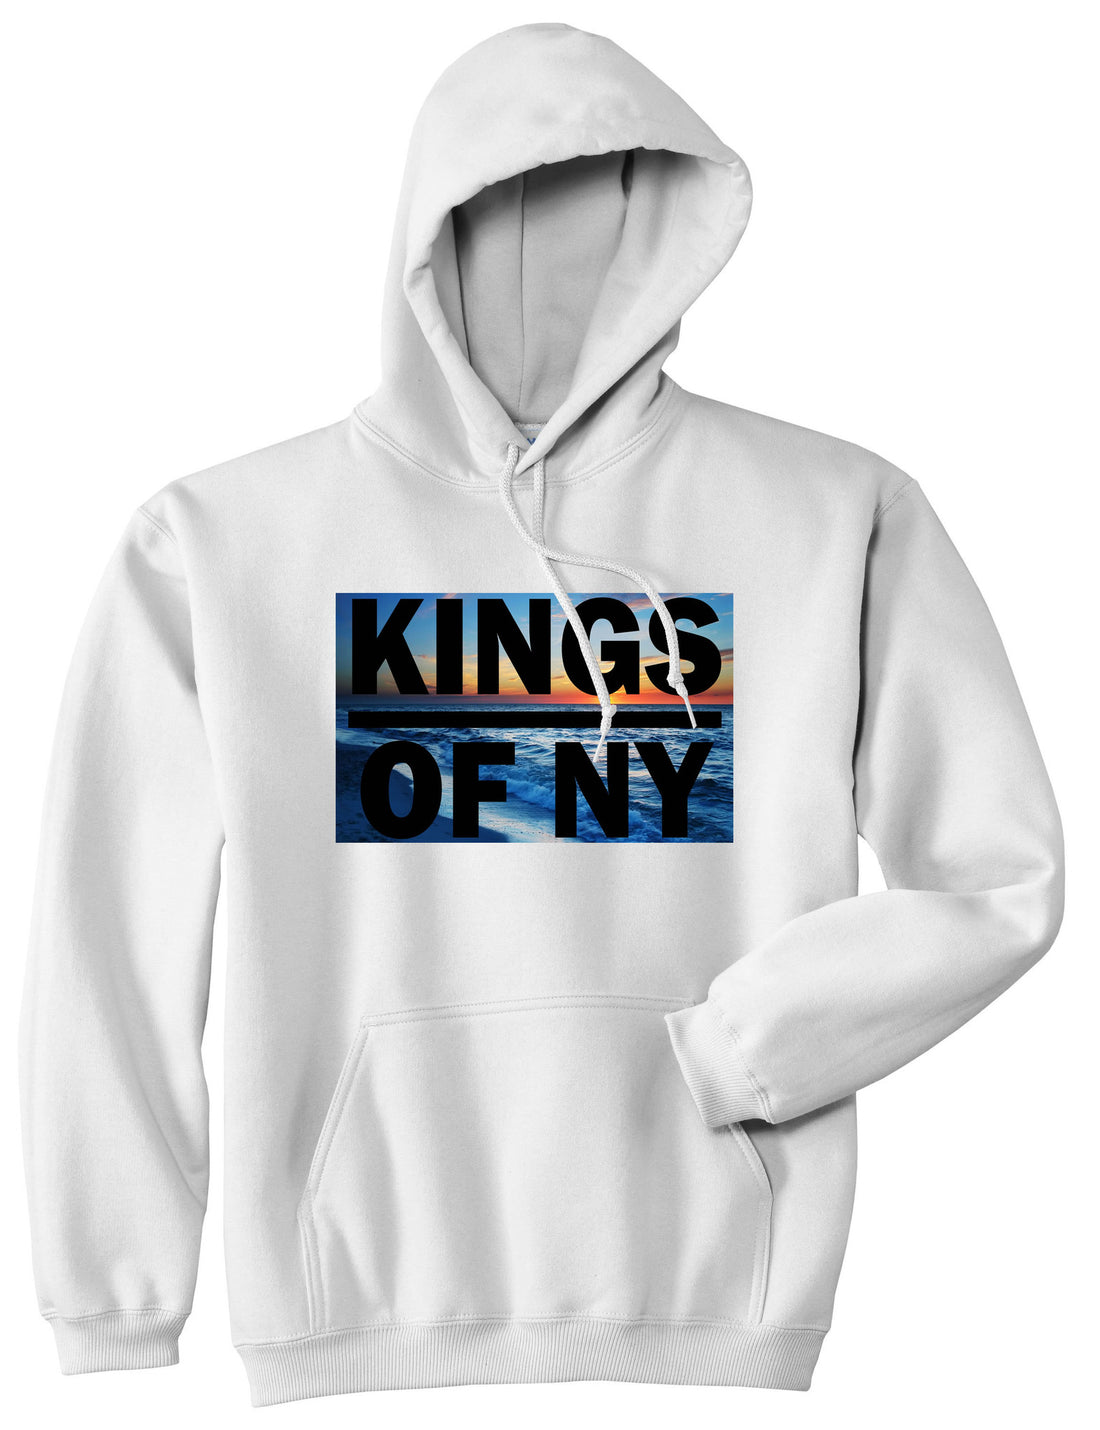 Sunset Logo Pullover Hoodie Hoody in White by Kings Of NY